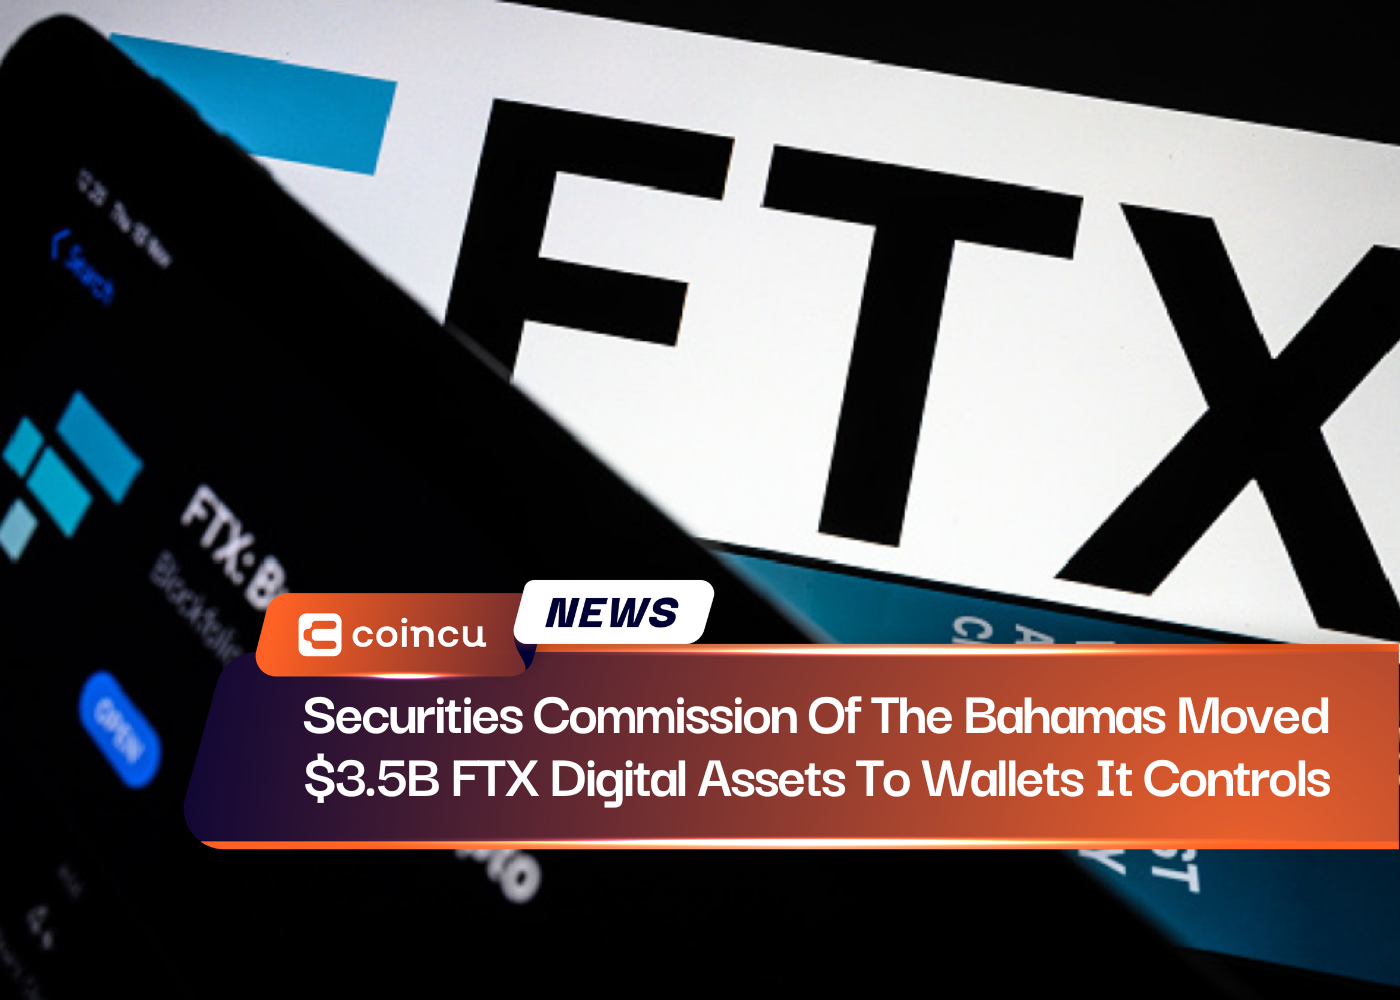 Securities Commission Of The Bahamas Moved $3.5B FTX Digital Assets To Wallets It Controls